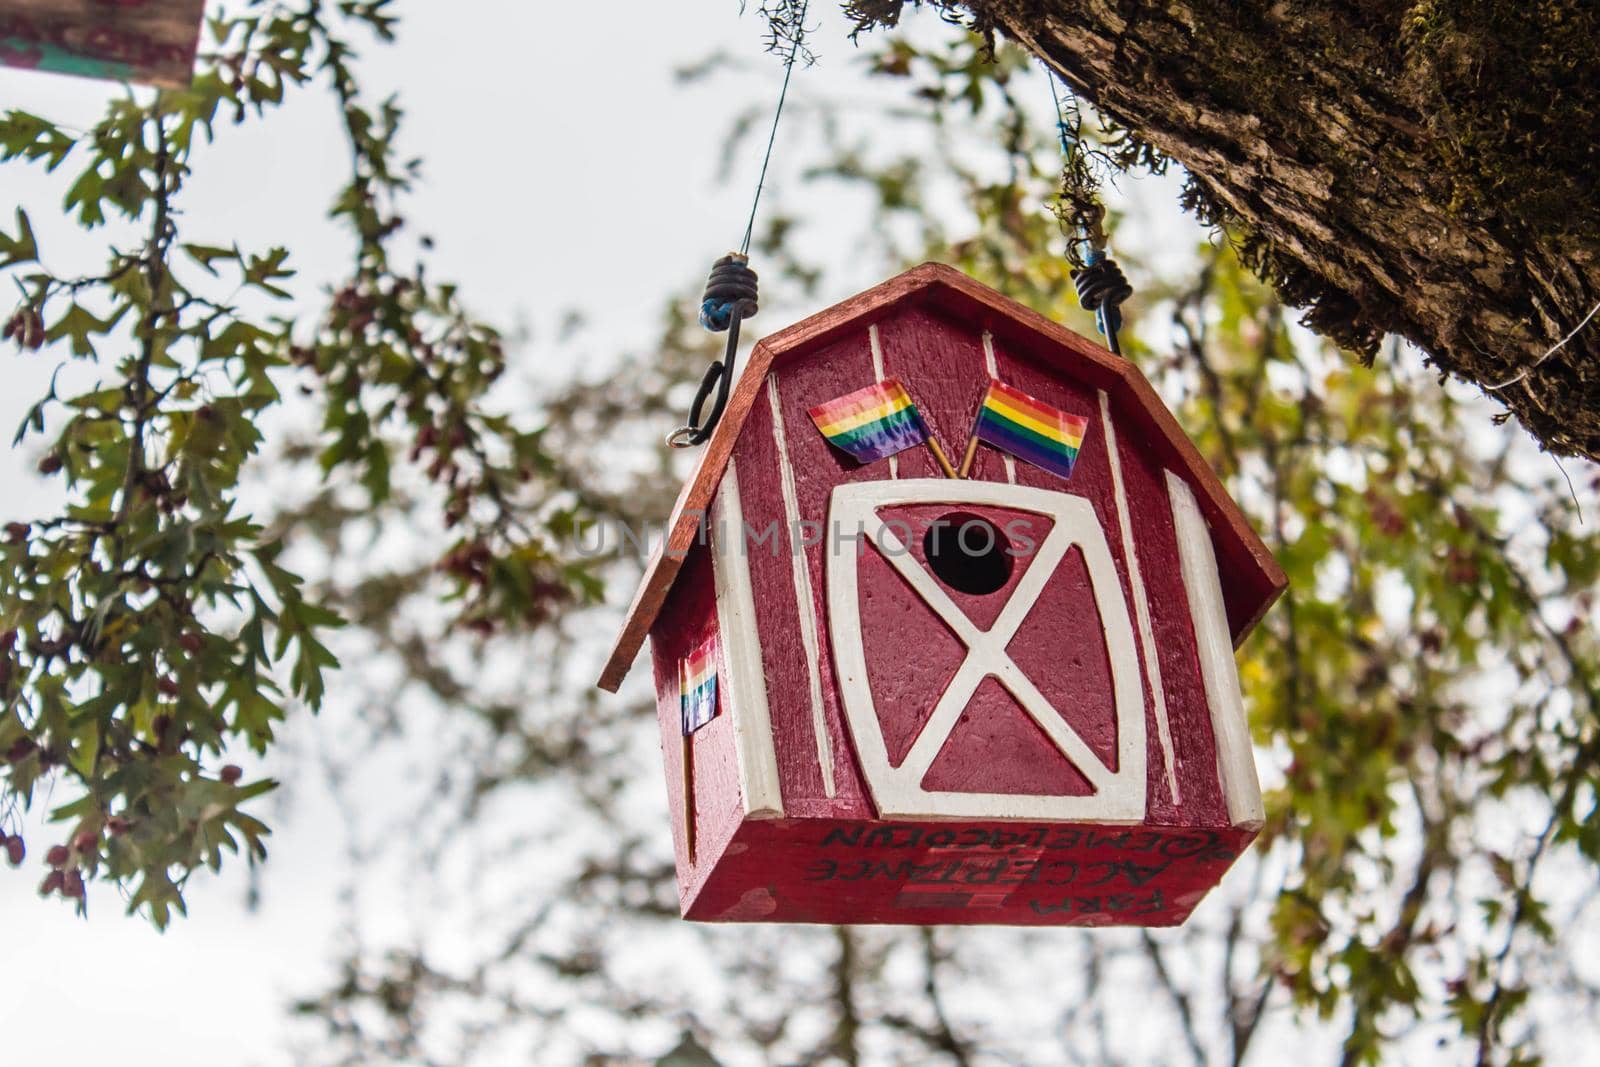 Vancouver, British Columbia, Canada - September 23, 2017: The red birdhouse on a tree in spring forest background by JuliaDorian